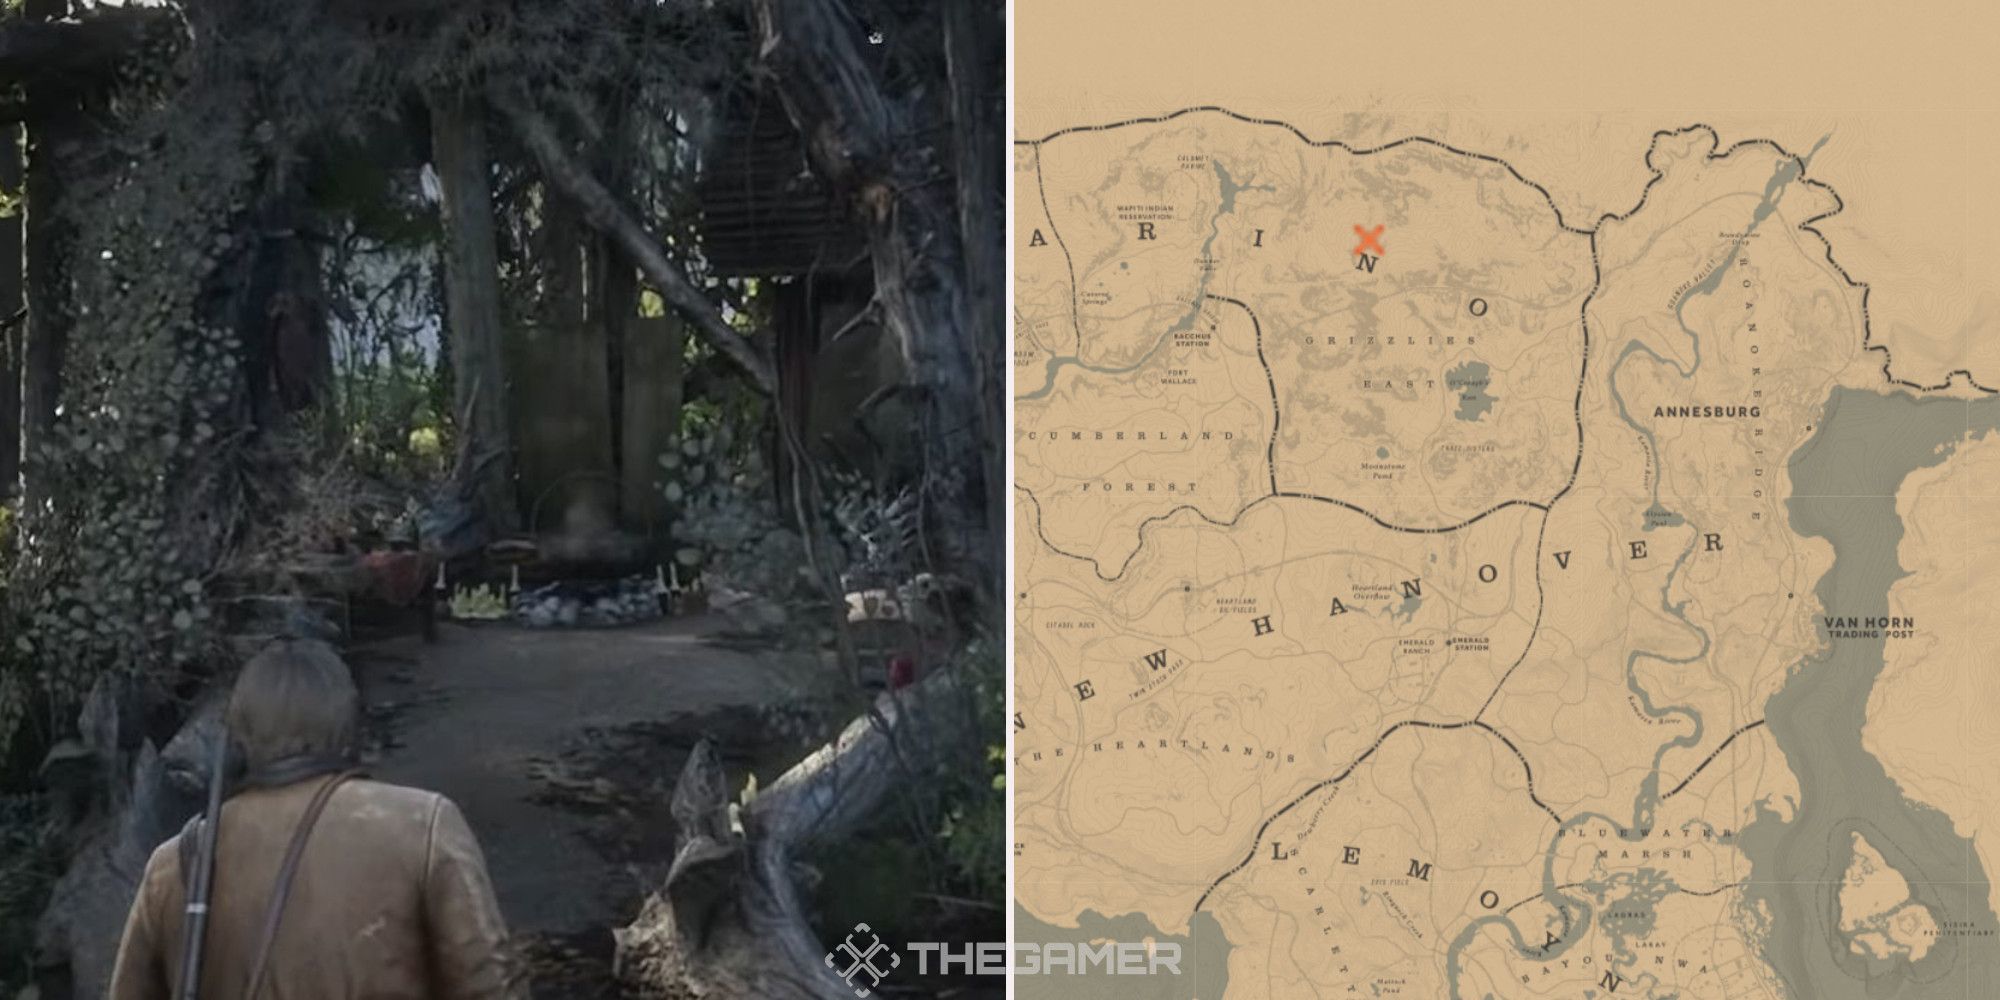 A witches cauldron in Red Dead Redemption 2, next to an image of where it can be found marked on the map.